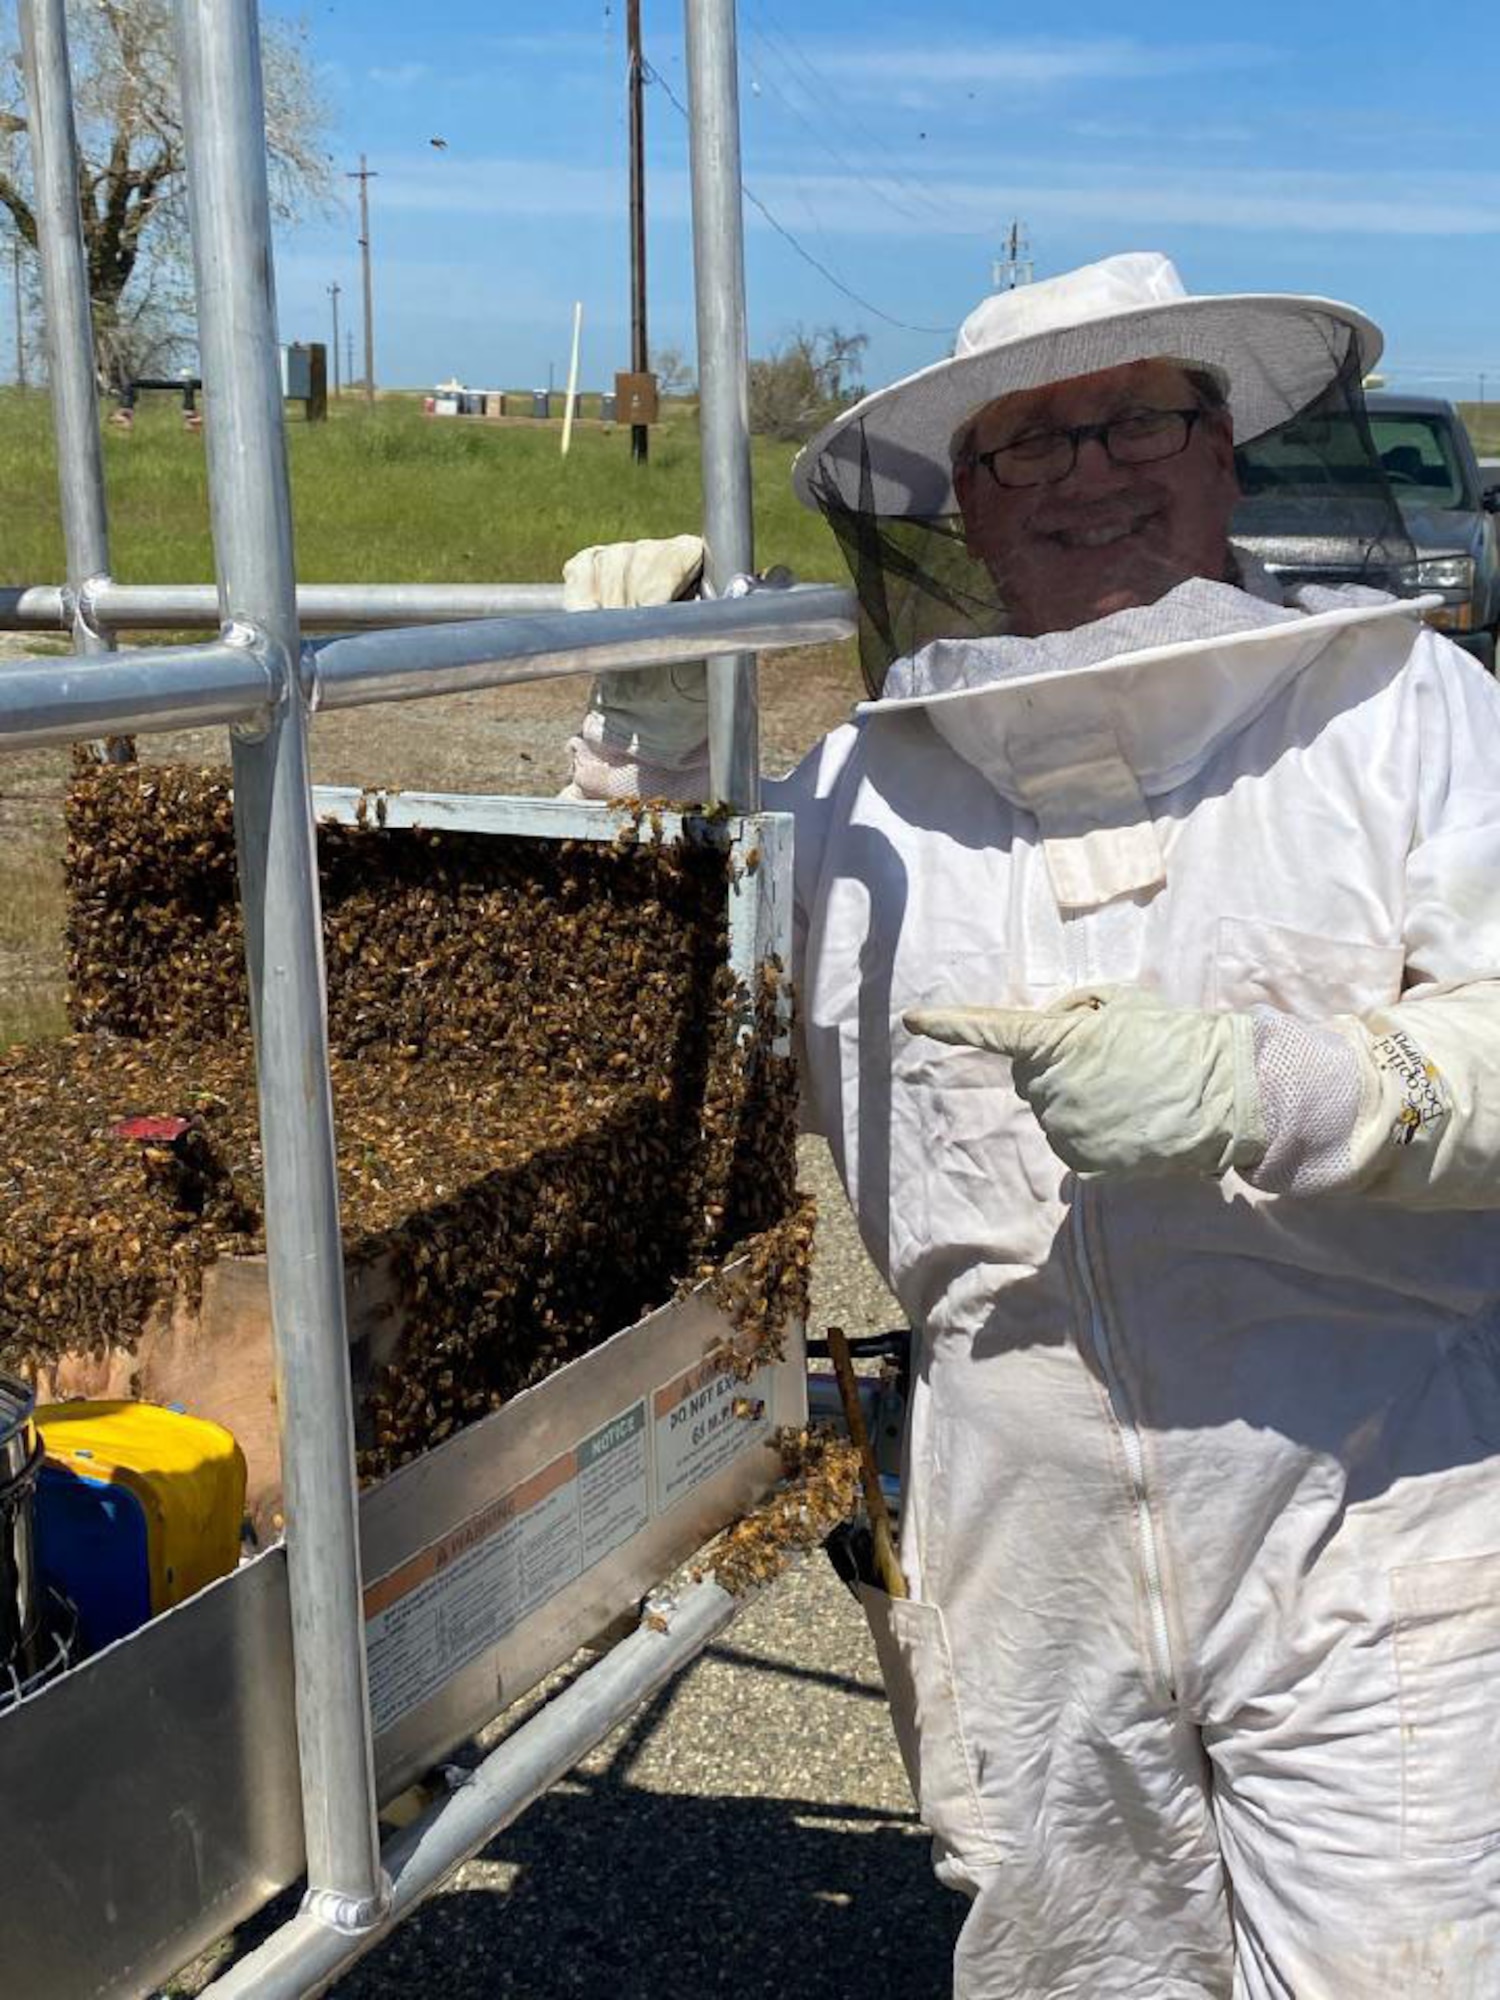 Blaze Baker, 9th Civil Engineer Squadron installation management flight chief, poses with a swarm of bees he caught at Beale Air Force Base, California, April 7, 2021.